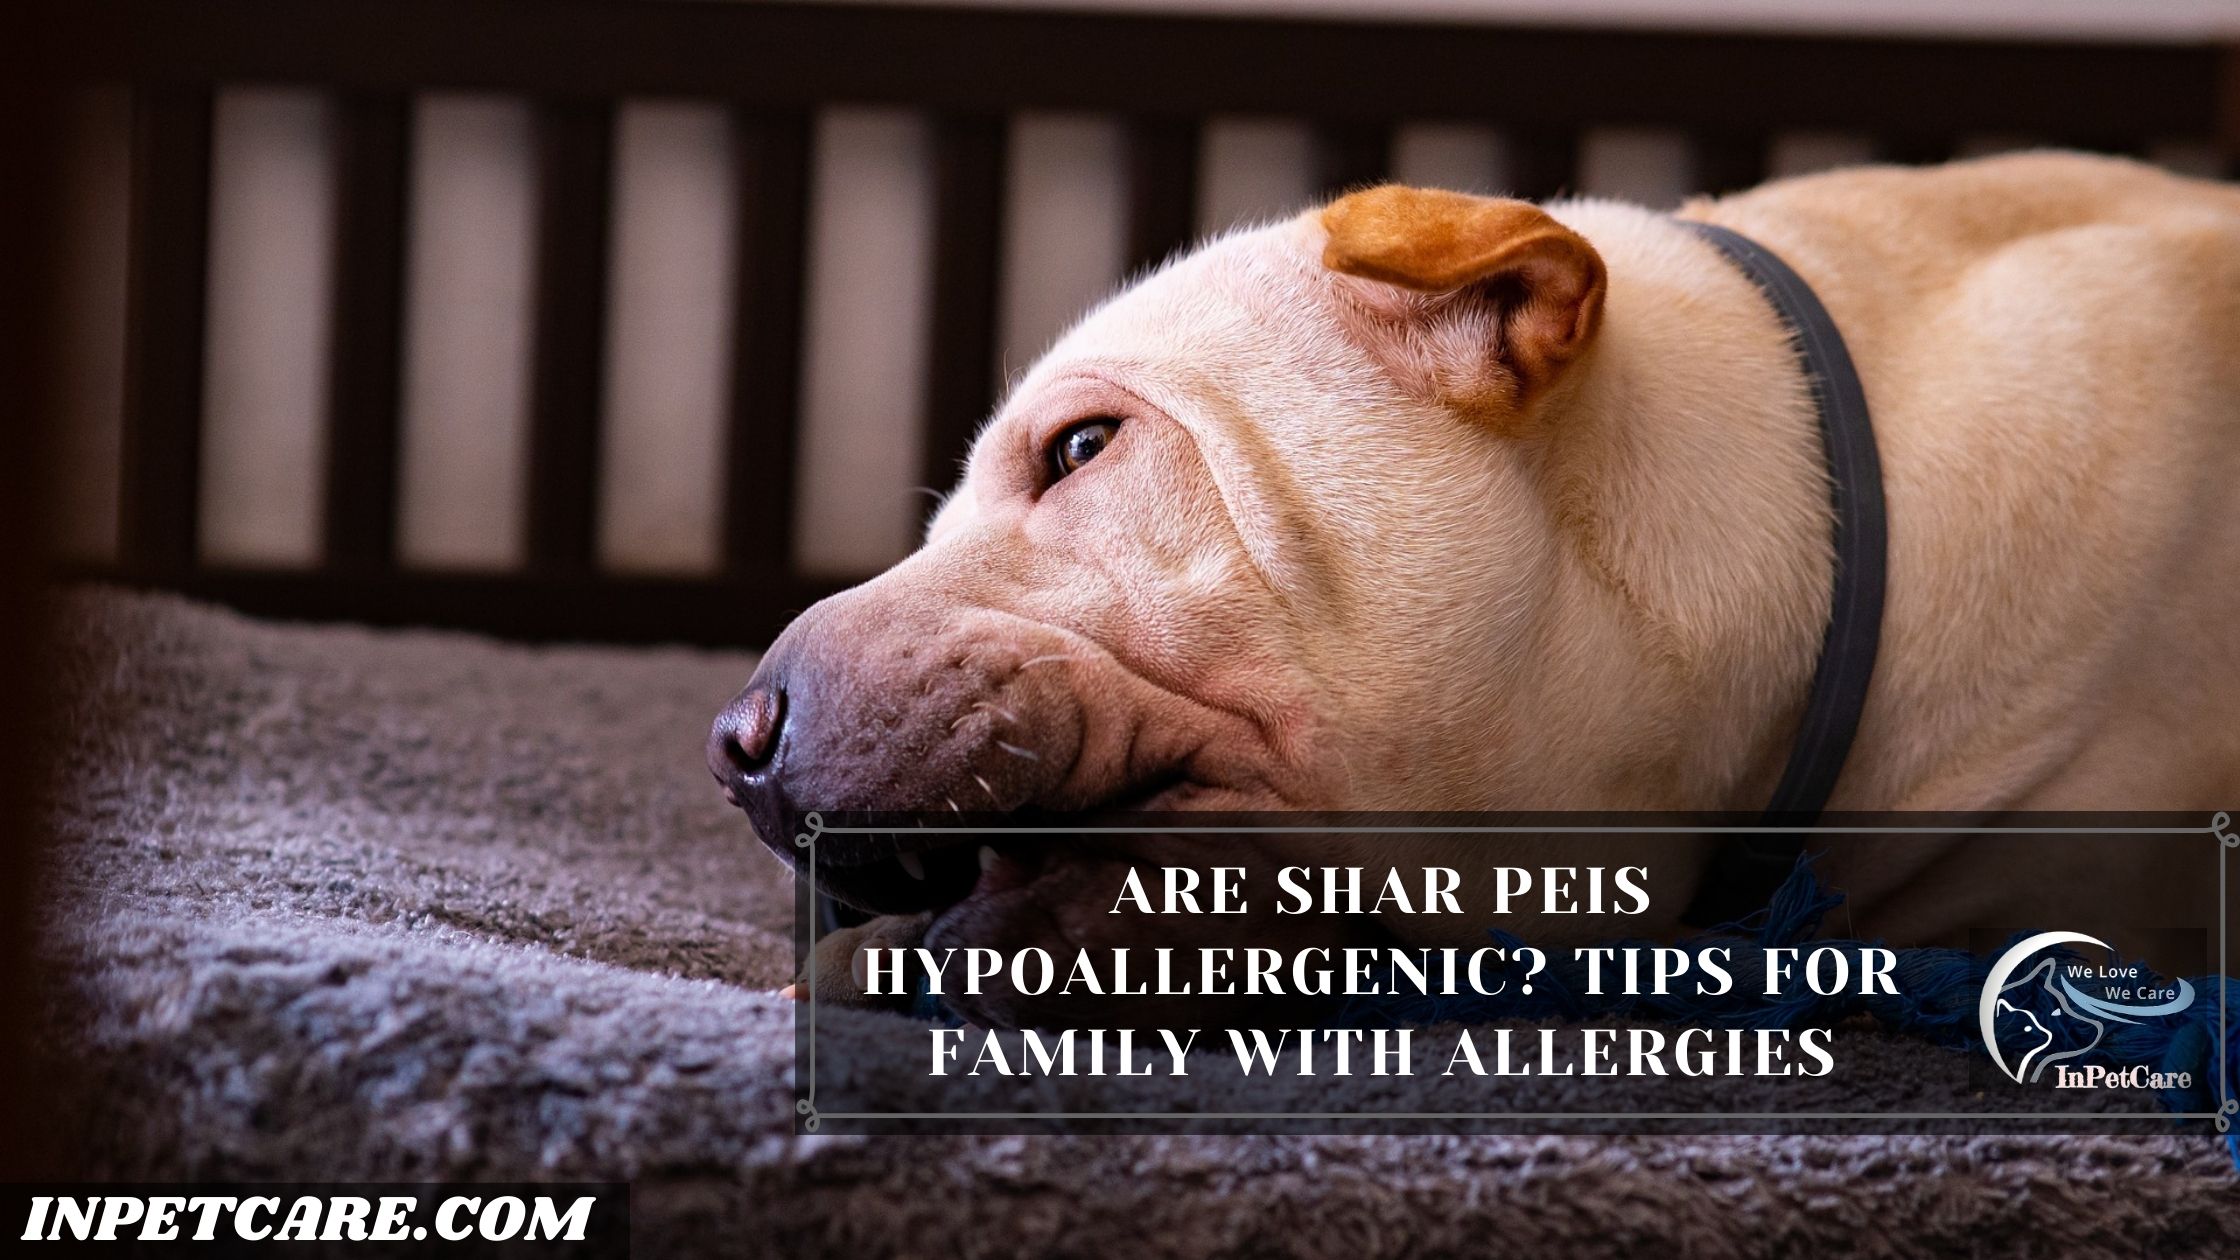 Are Shar Peis Hypoallergenic? Tips For Family With Allergies